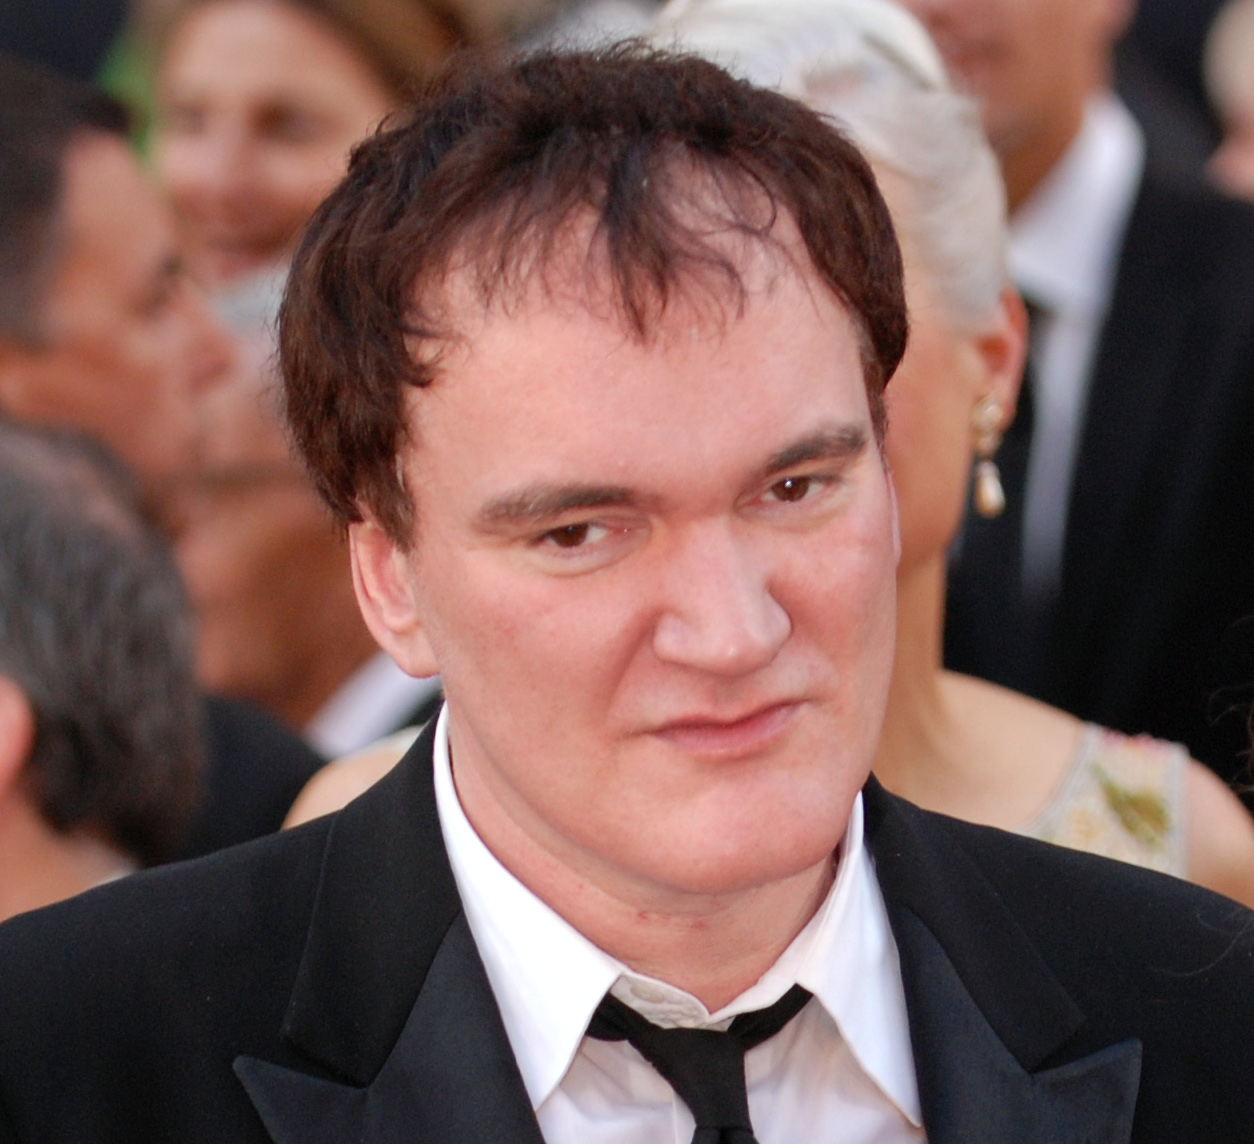 Quentin_Tarantino_and_Diane_Kruger_@_2010_Academy_Awards.jpg: Photo by Sgt. Michael Connorsderivative work: SaloméW, Public domain, via Wikimedia Commons